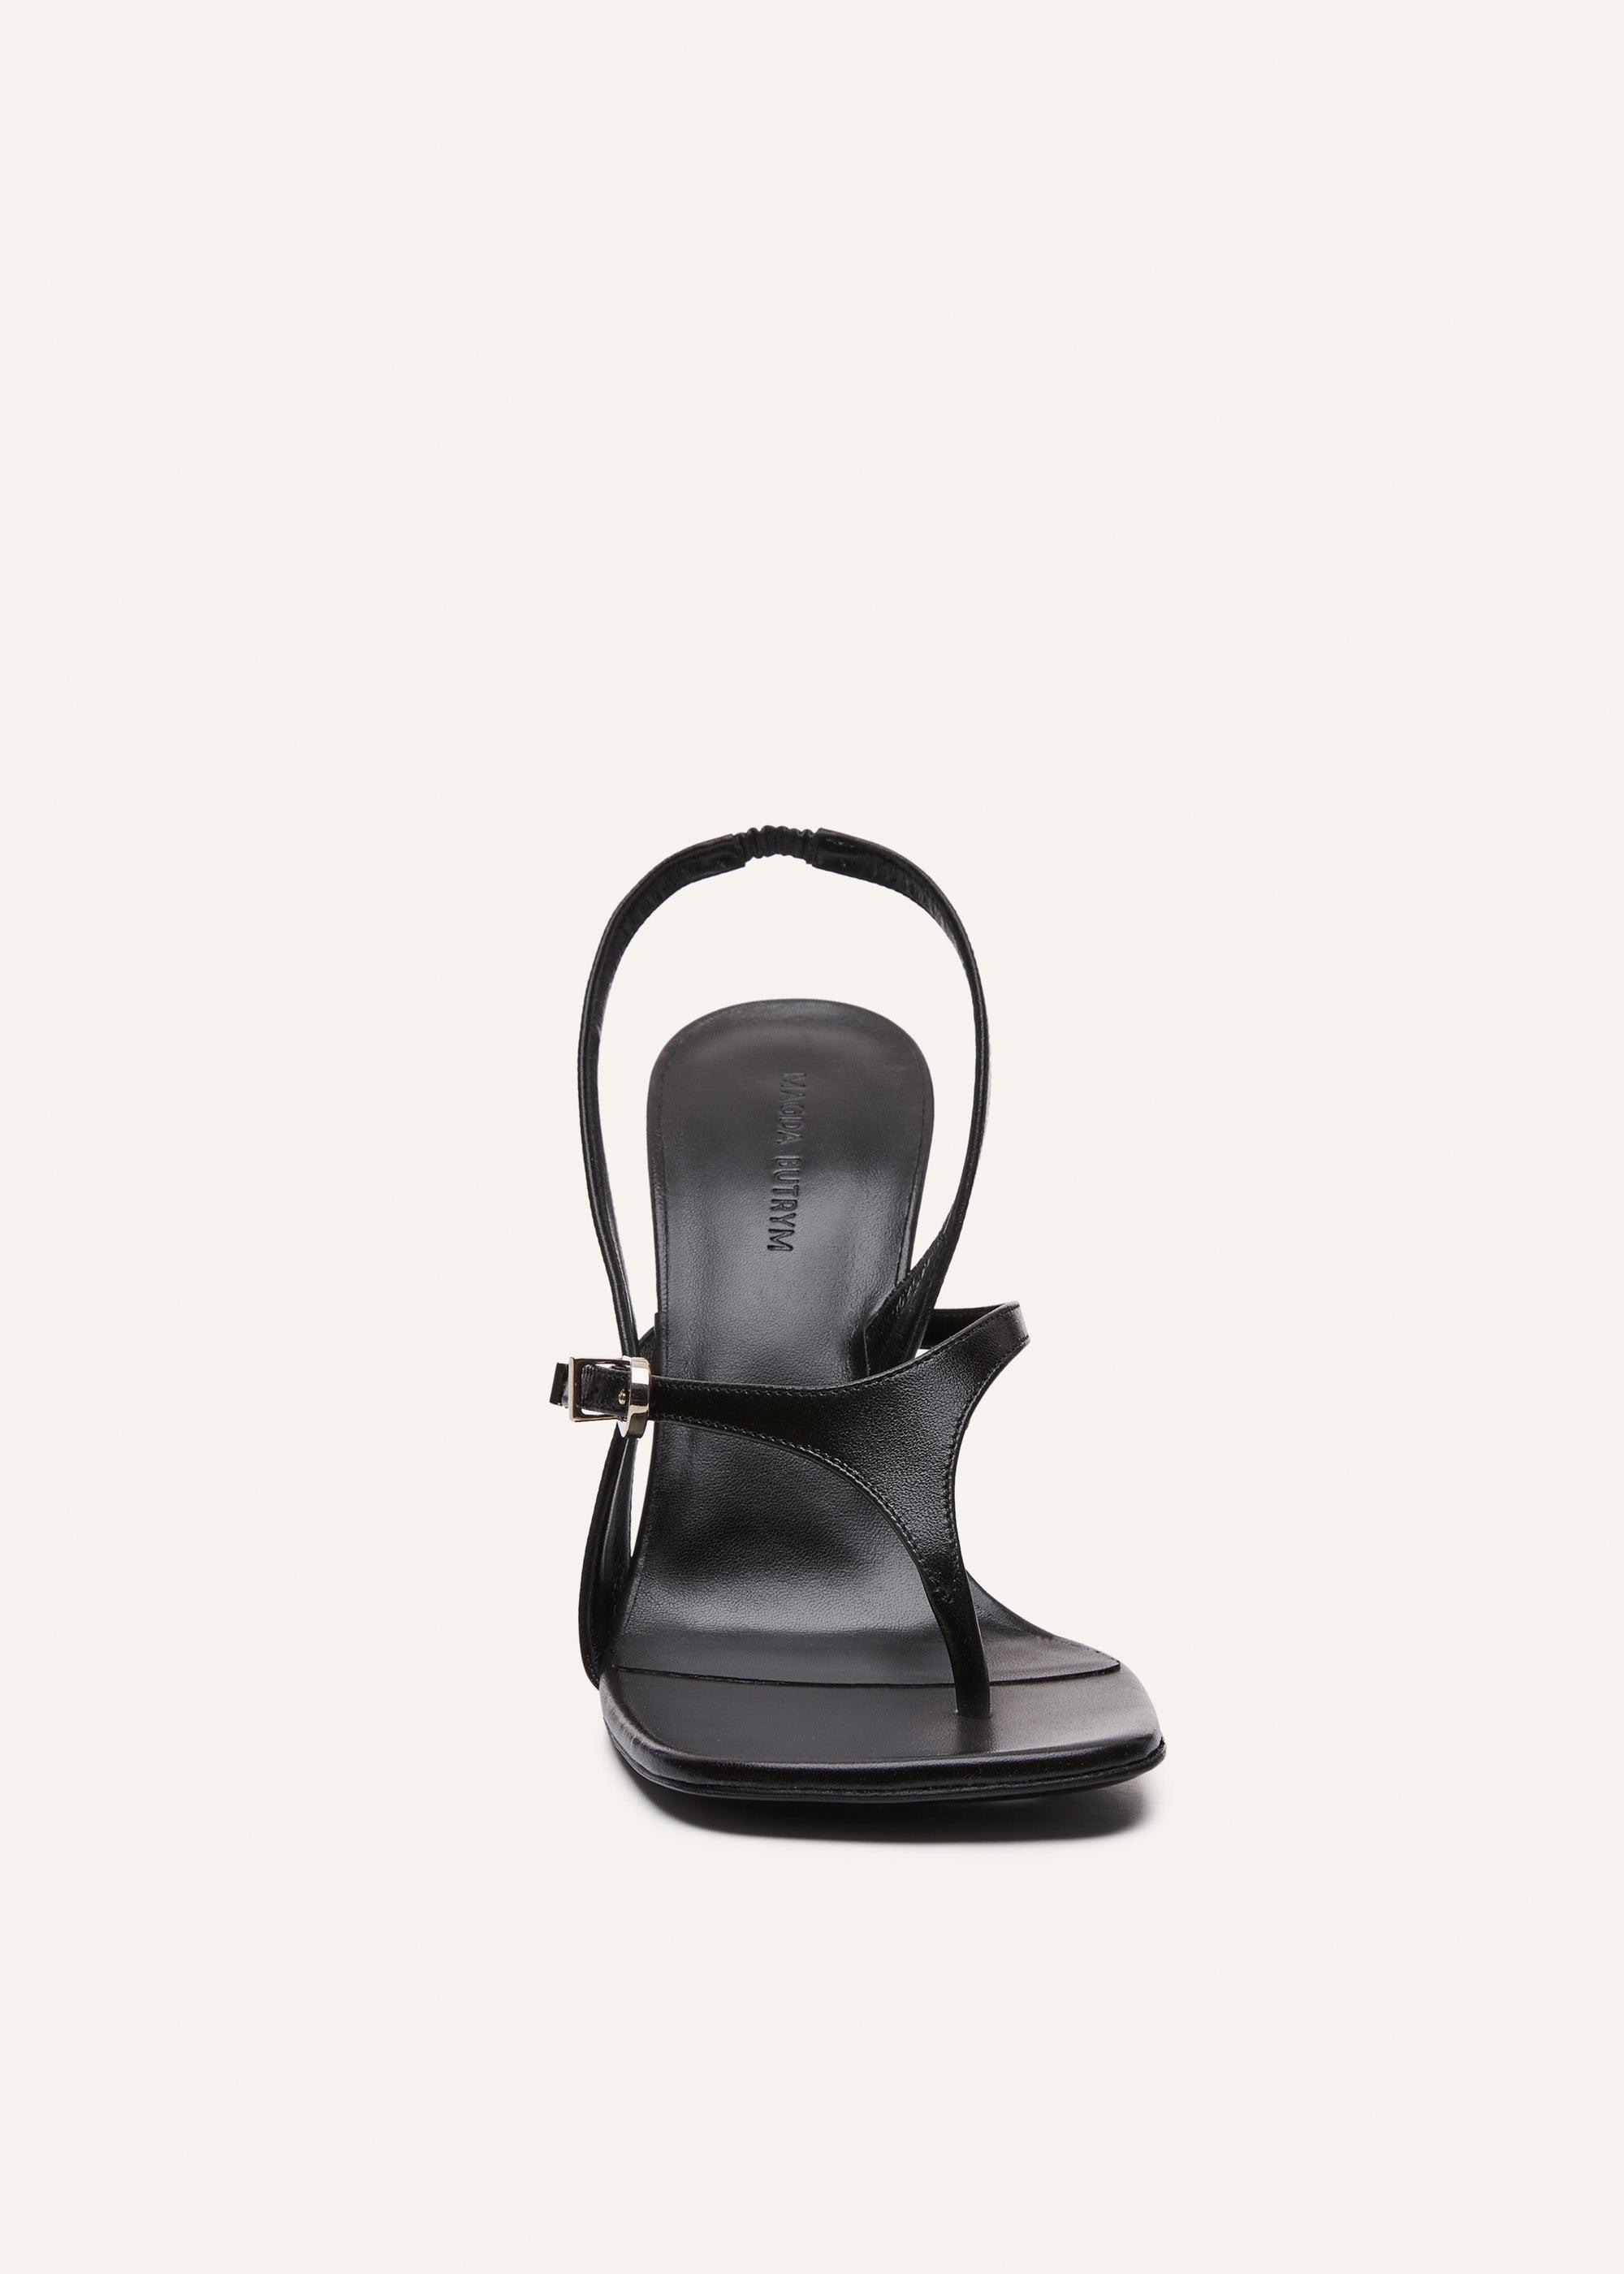 Thong sandals in black leather Product Image